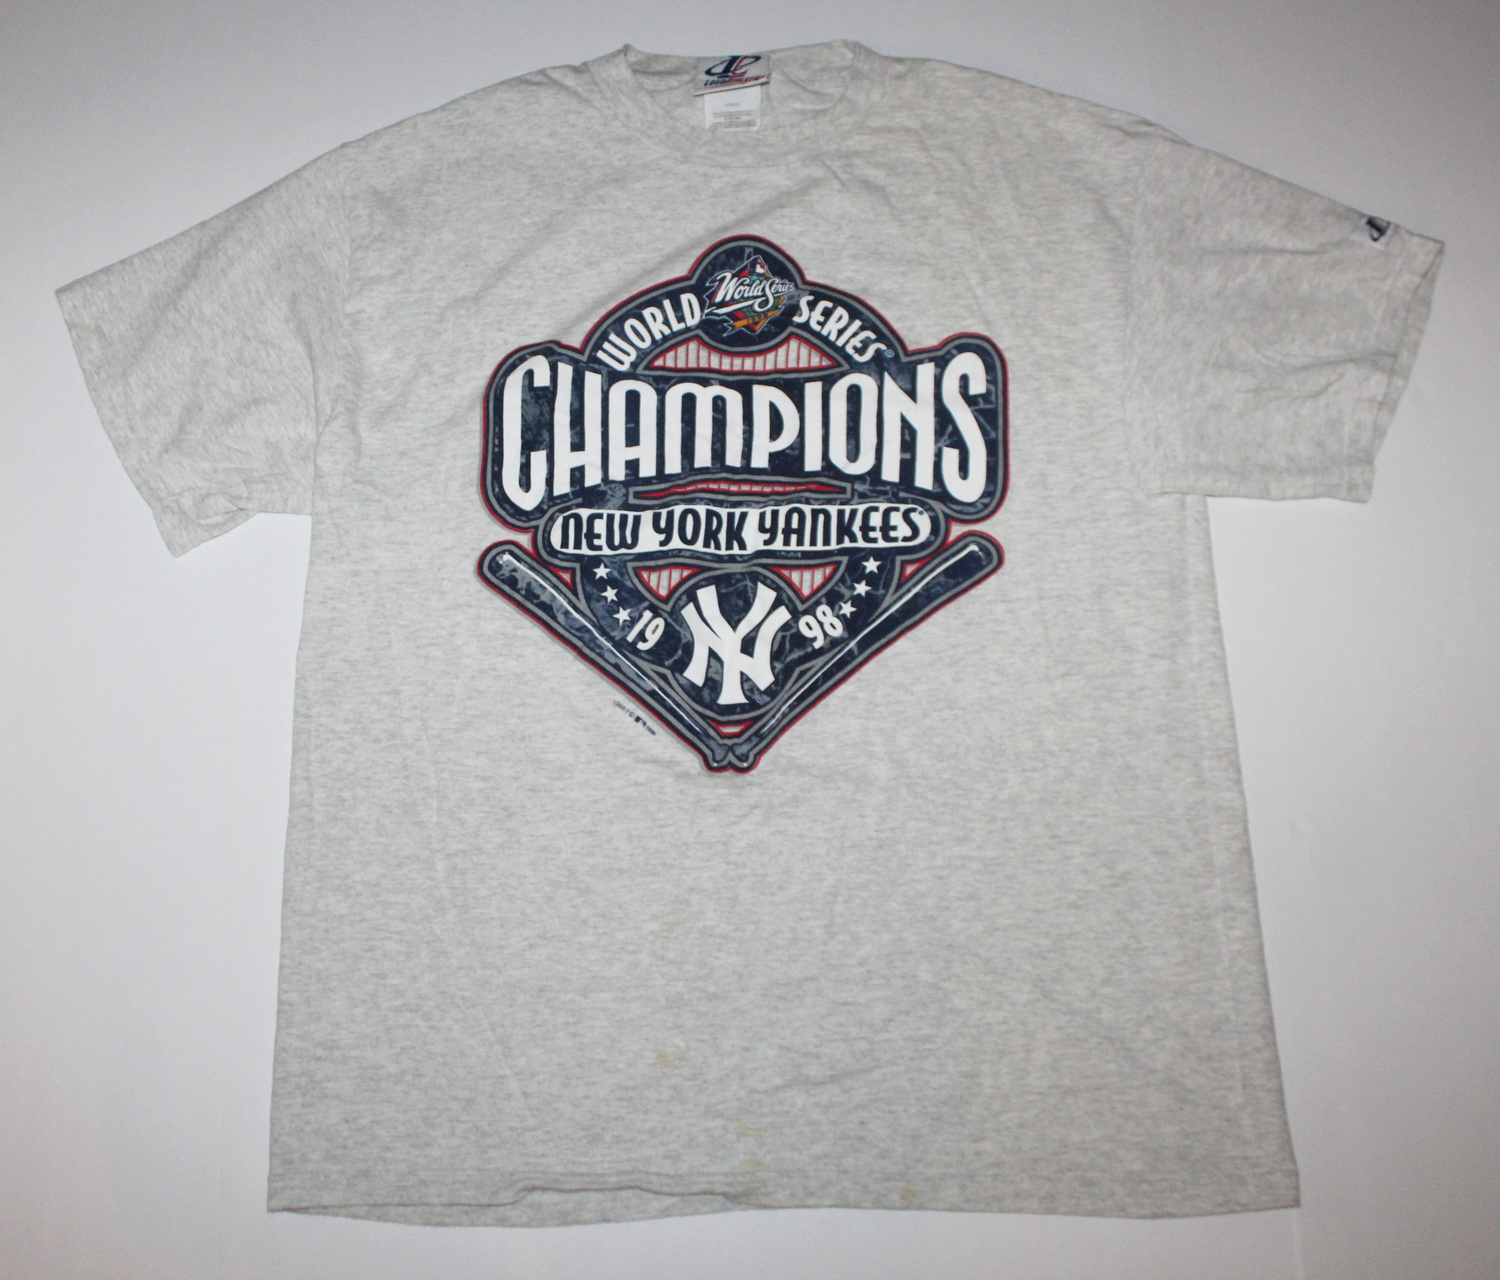 New York Yankees Al East Division Champions Mlb Fans Personalized Polo  Shirts - Peto Rugs